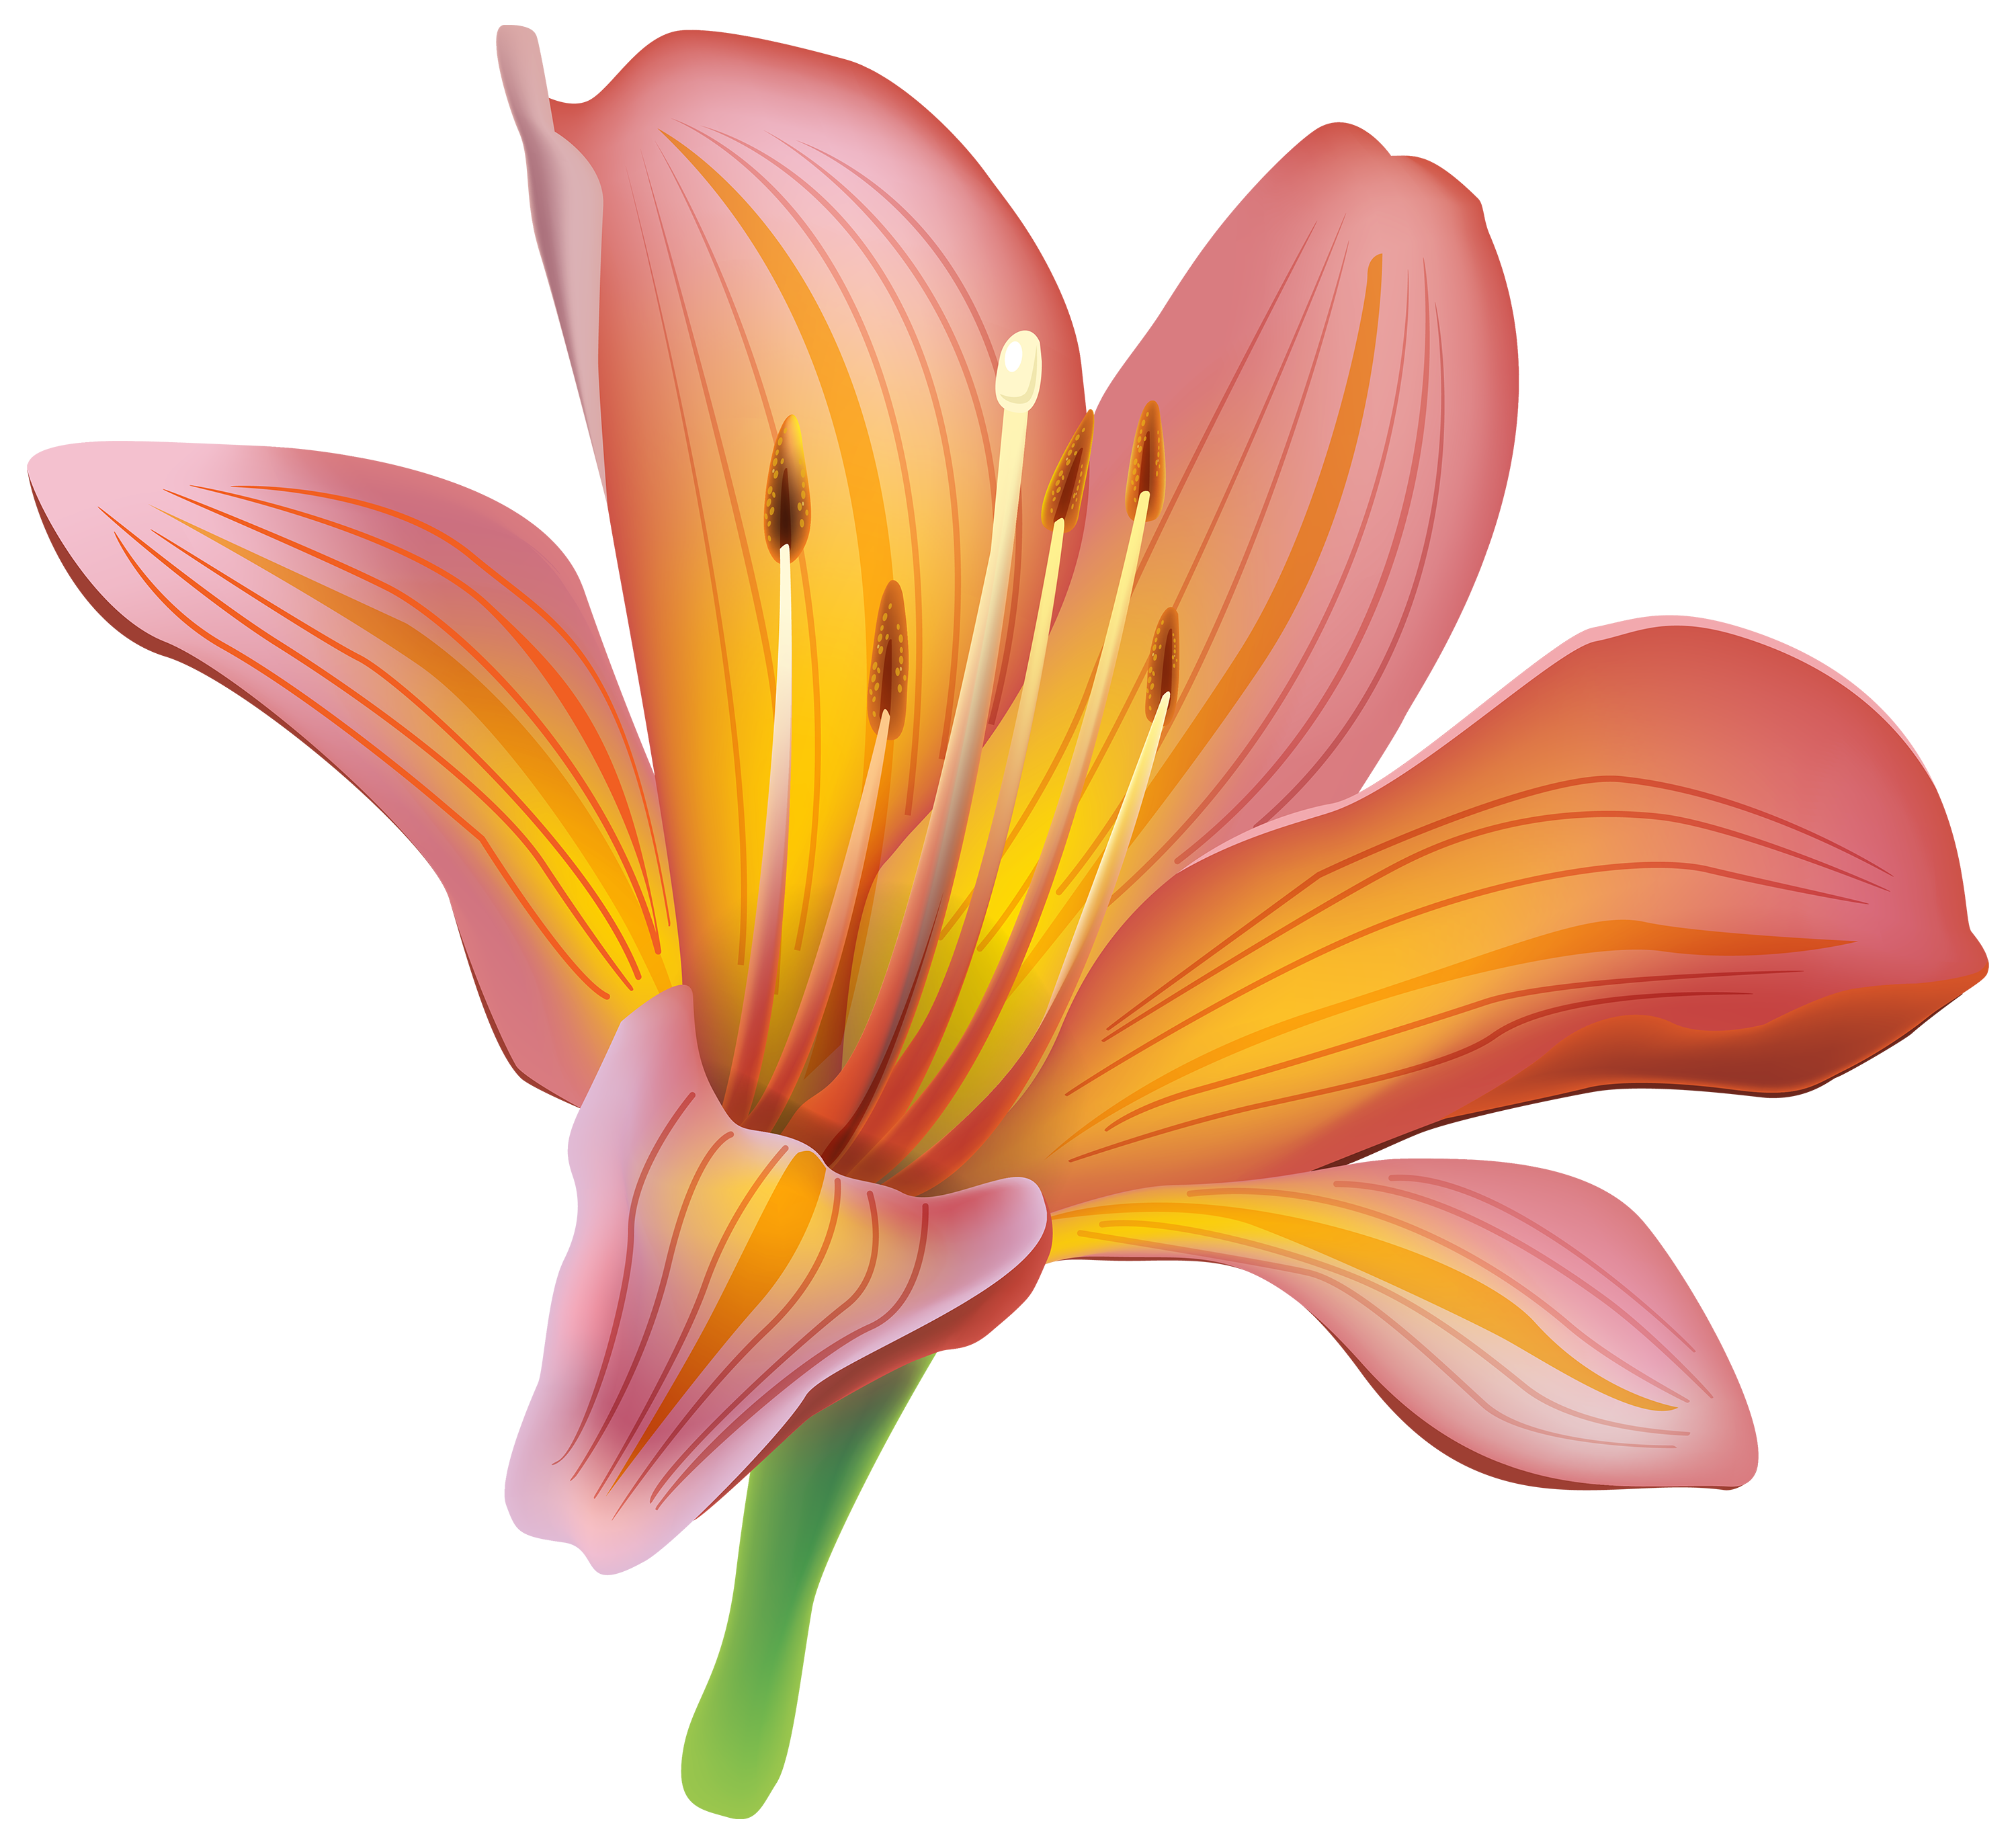 View 18 Flower Png Images - neontrendage